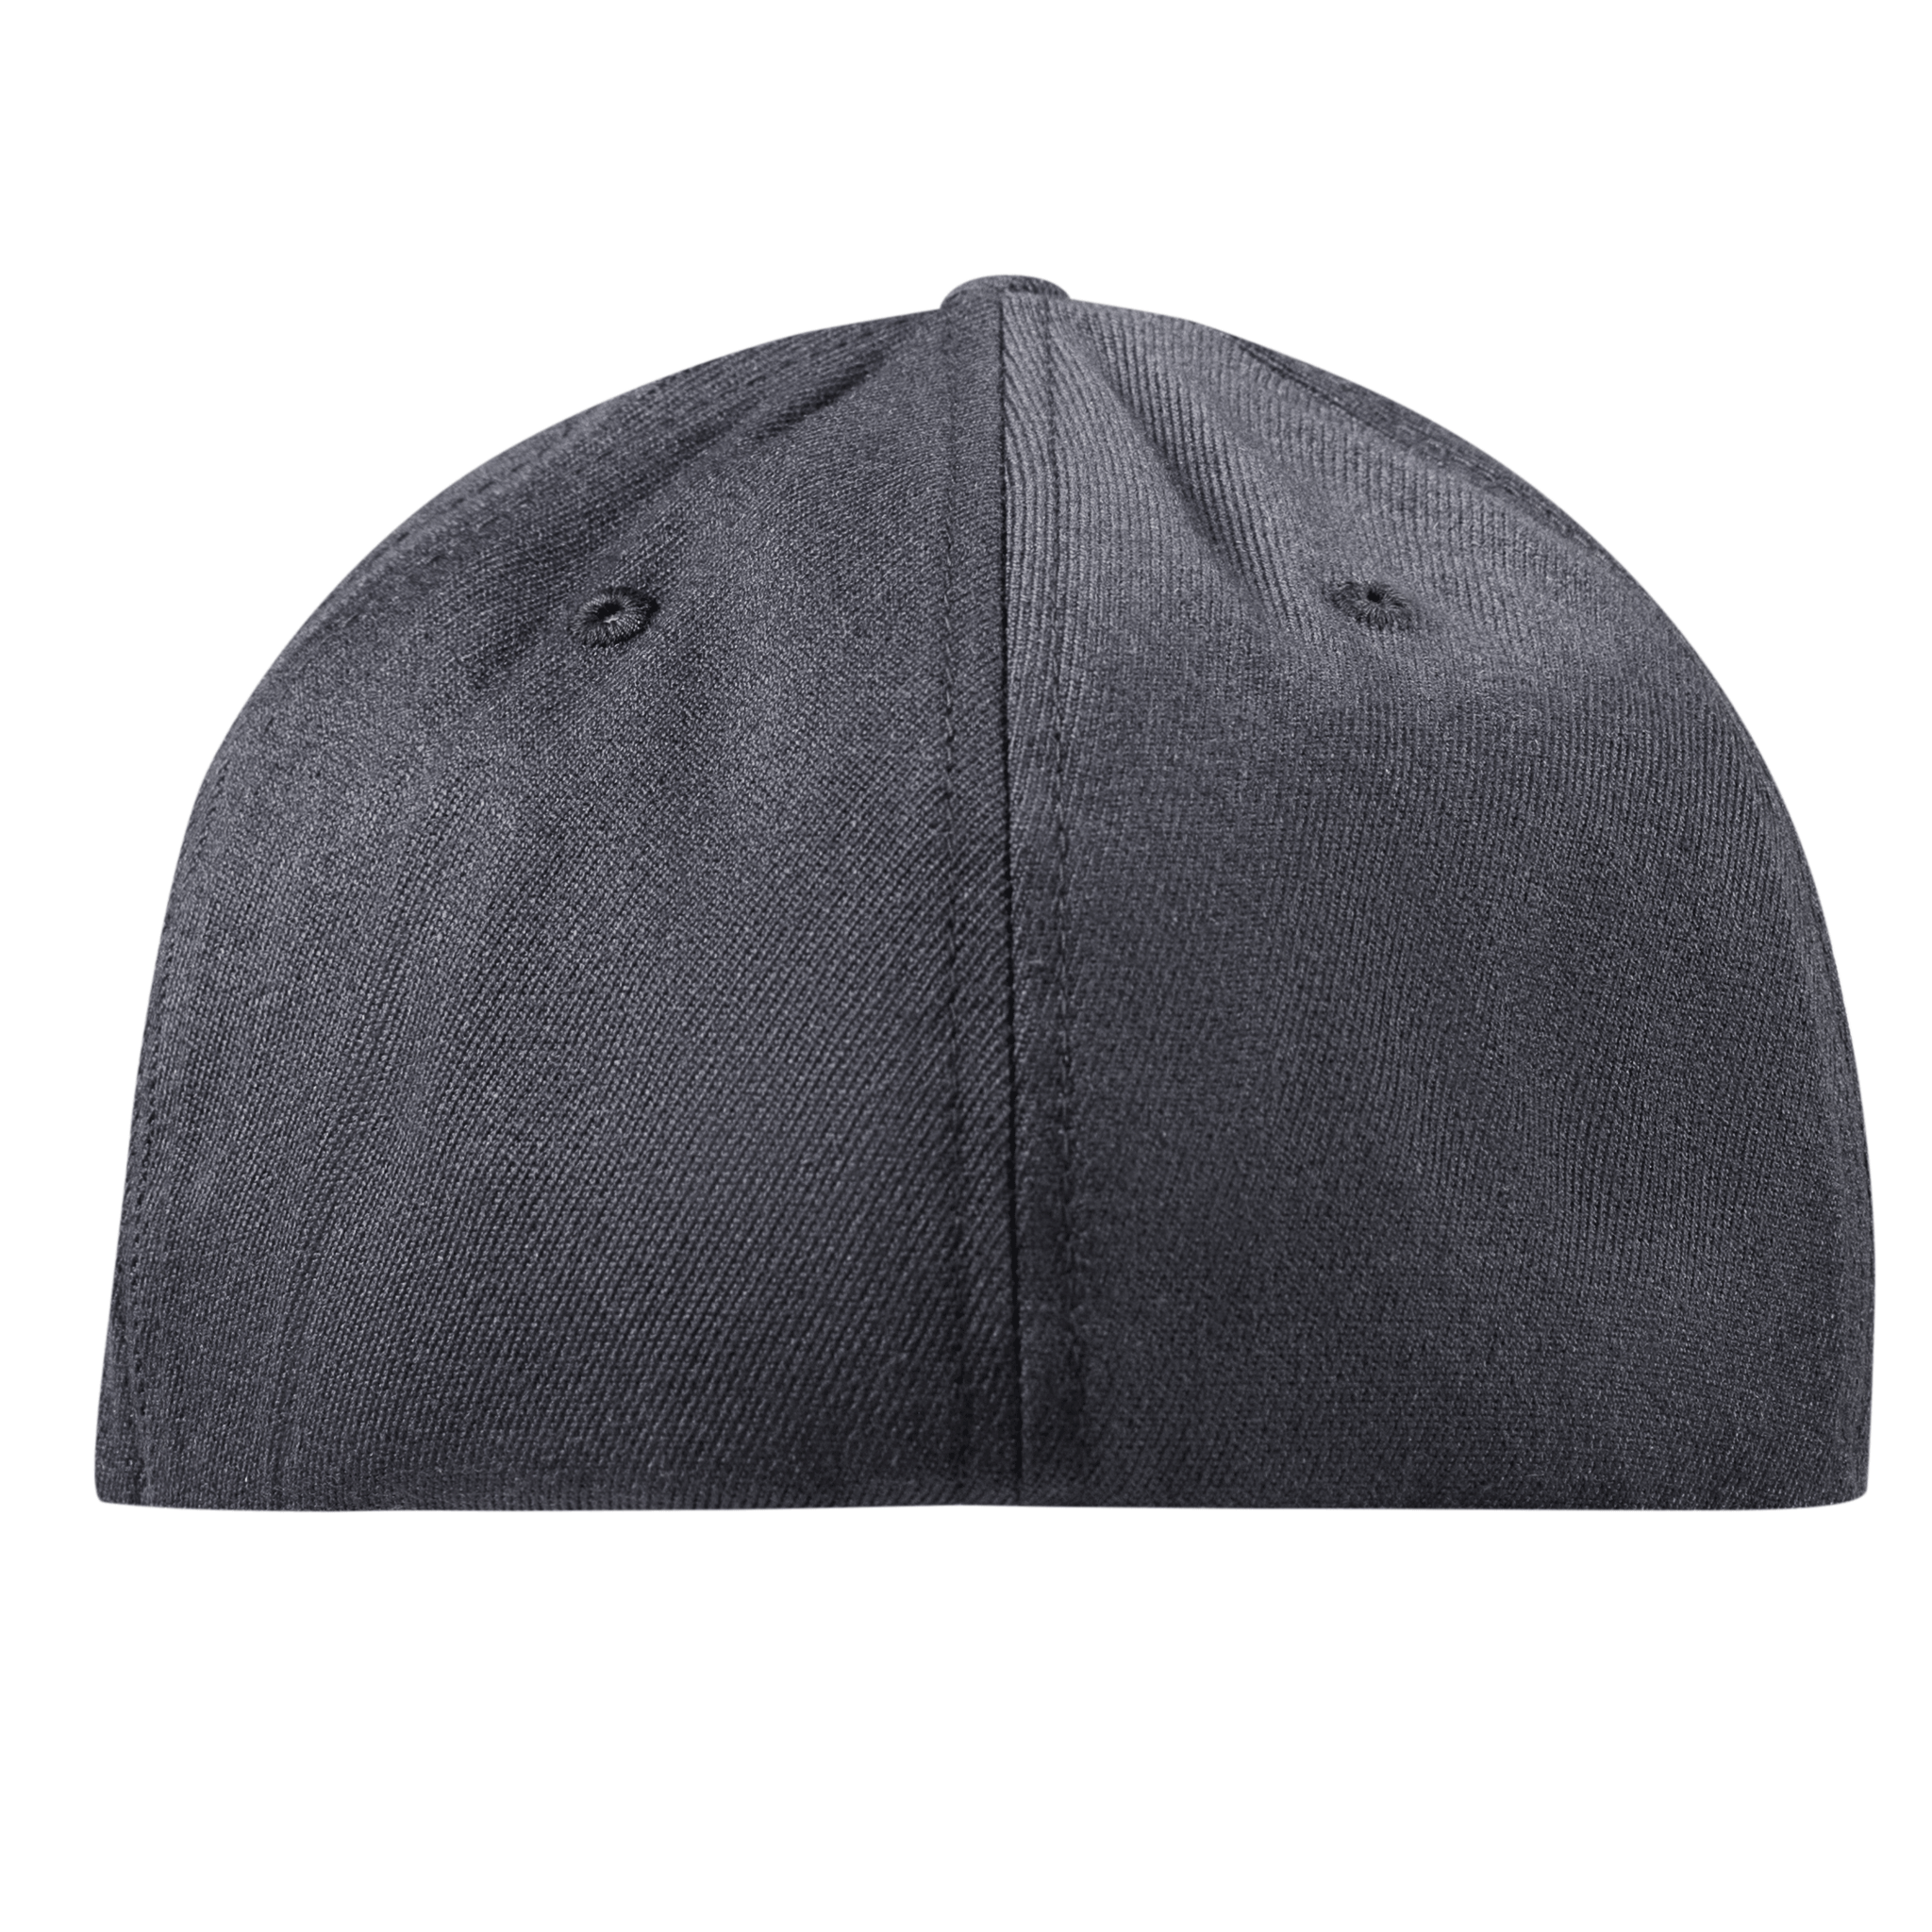 Indiana Camo Flexfit Fitted Back Charcoal